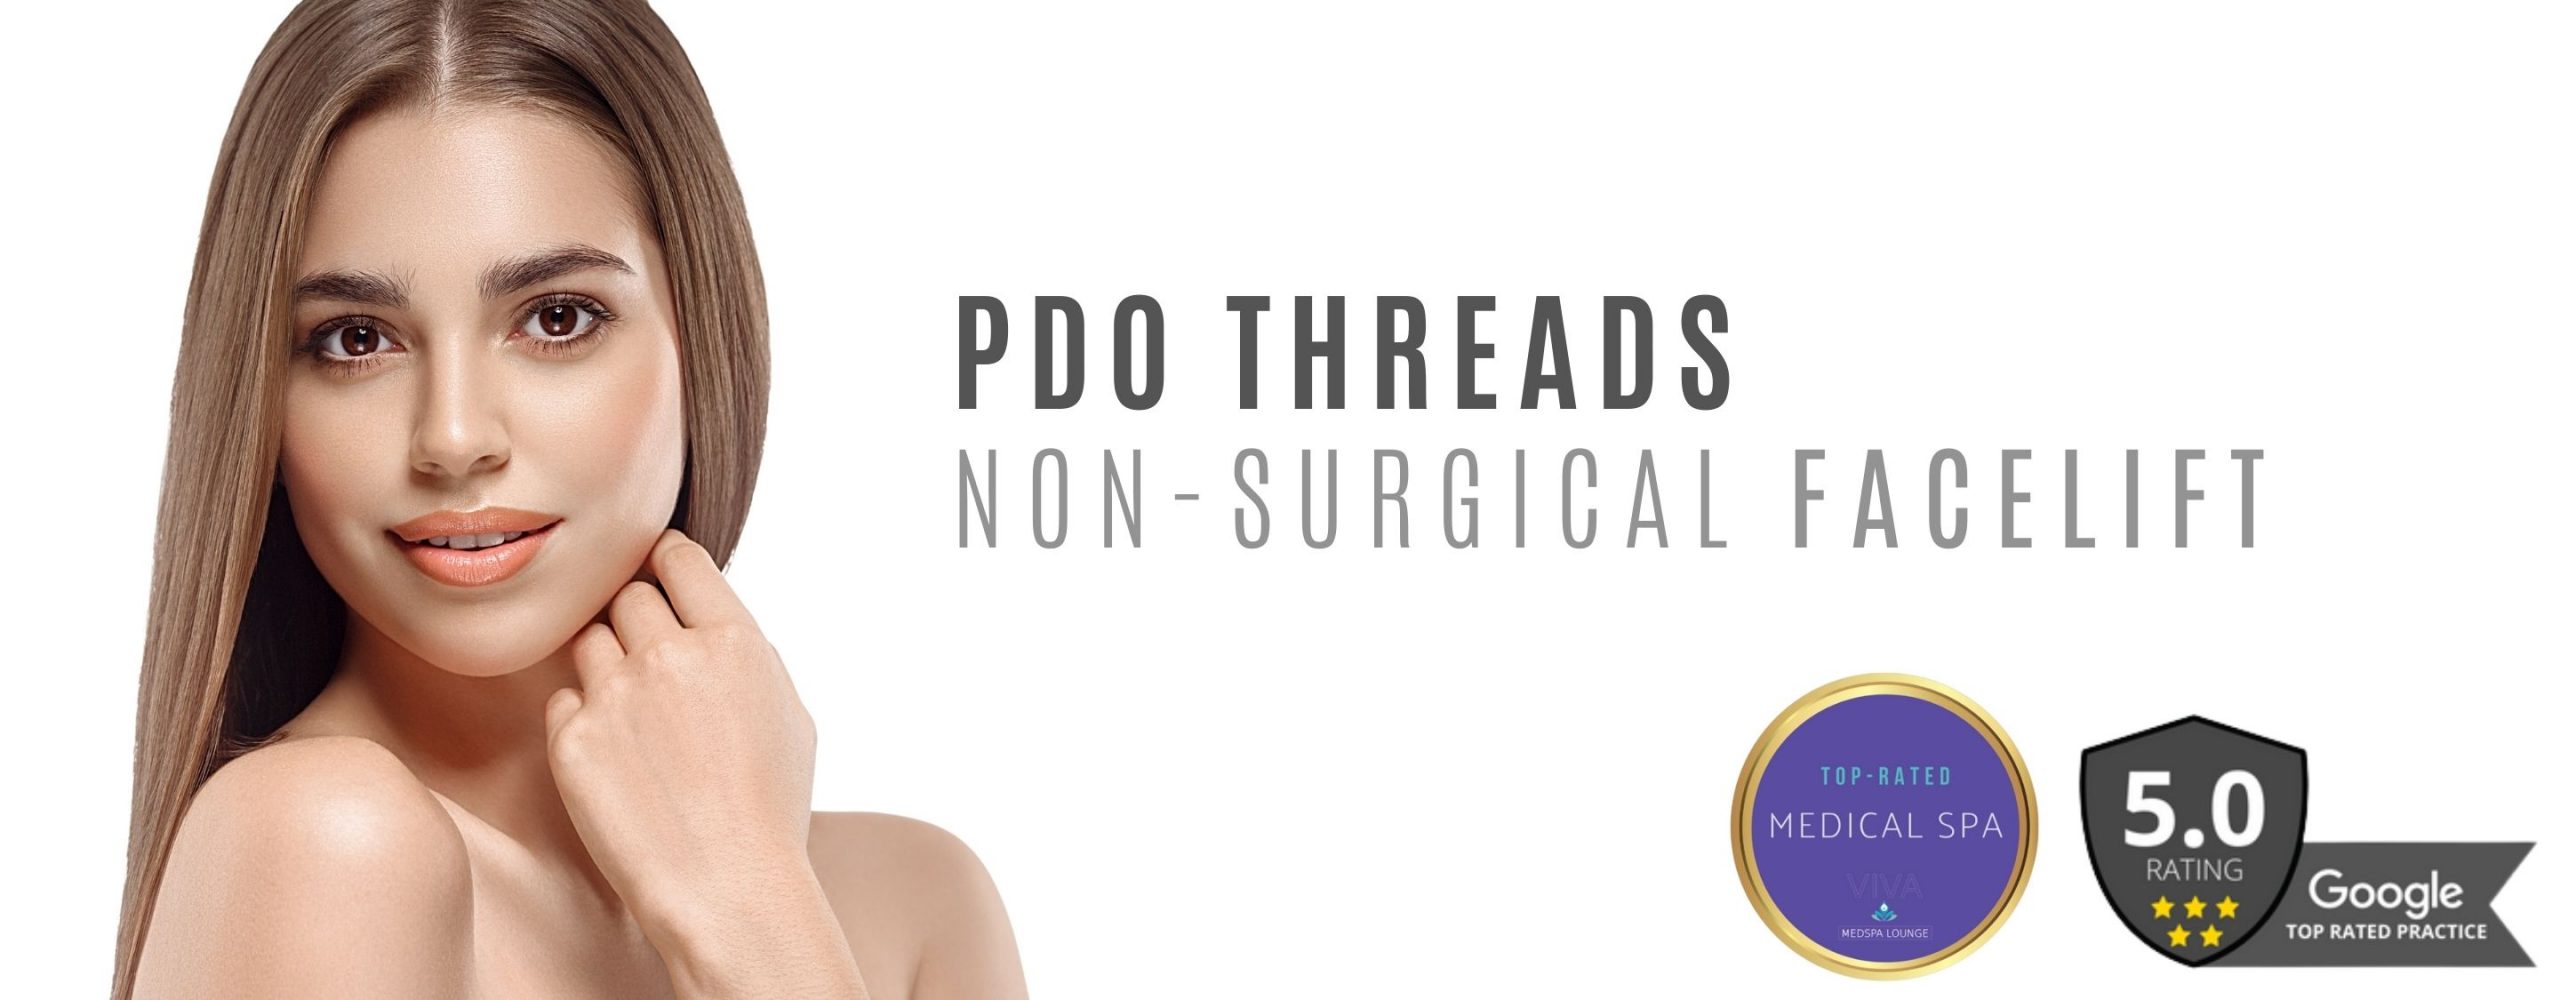 woman with clear skin promoting PDO Threads